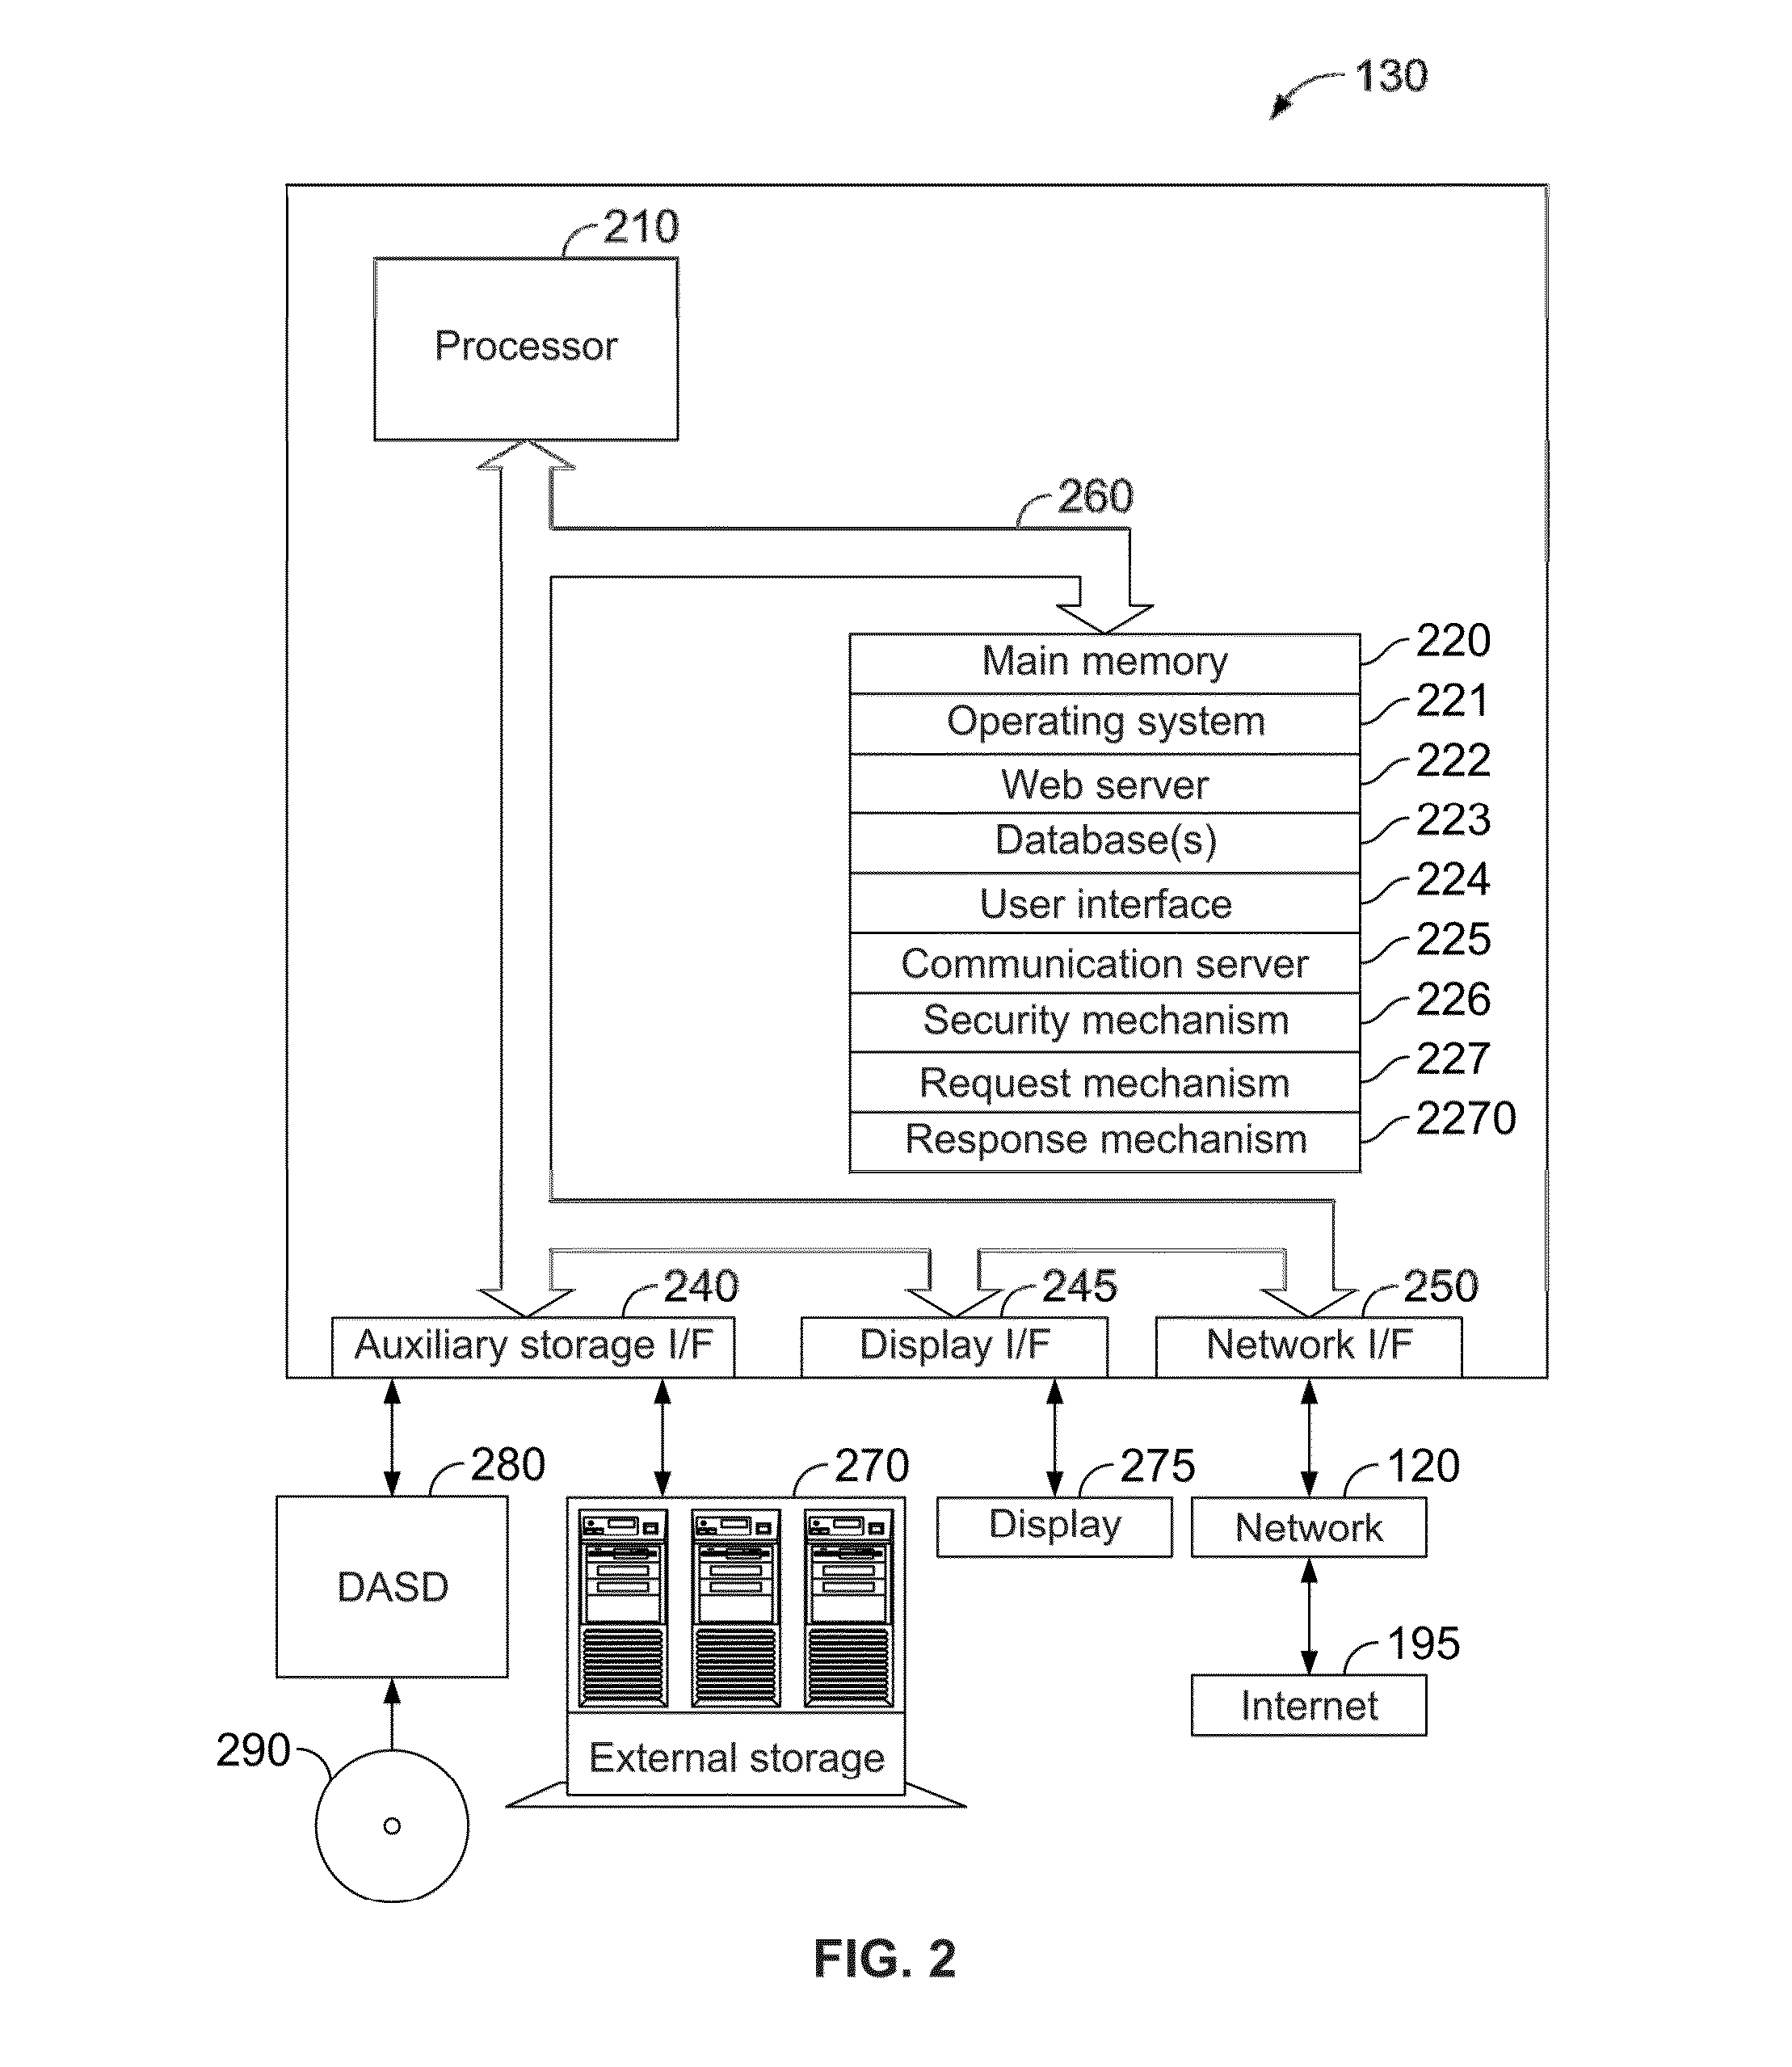 System and method for receiving requests and responding to emergencies